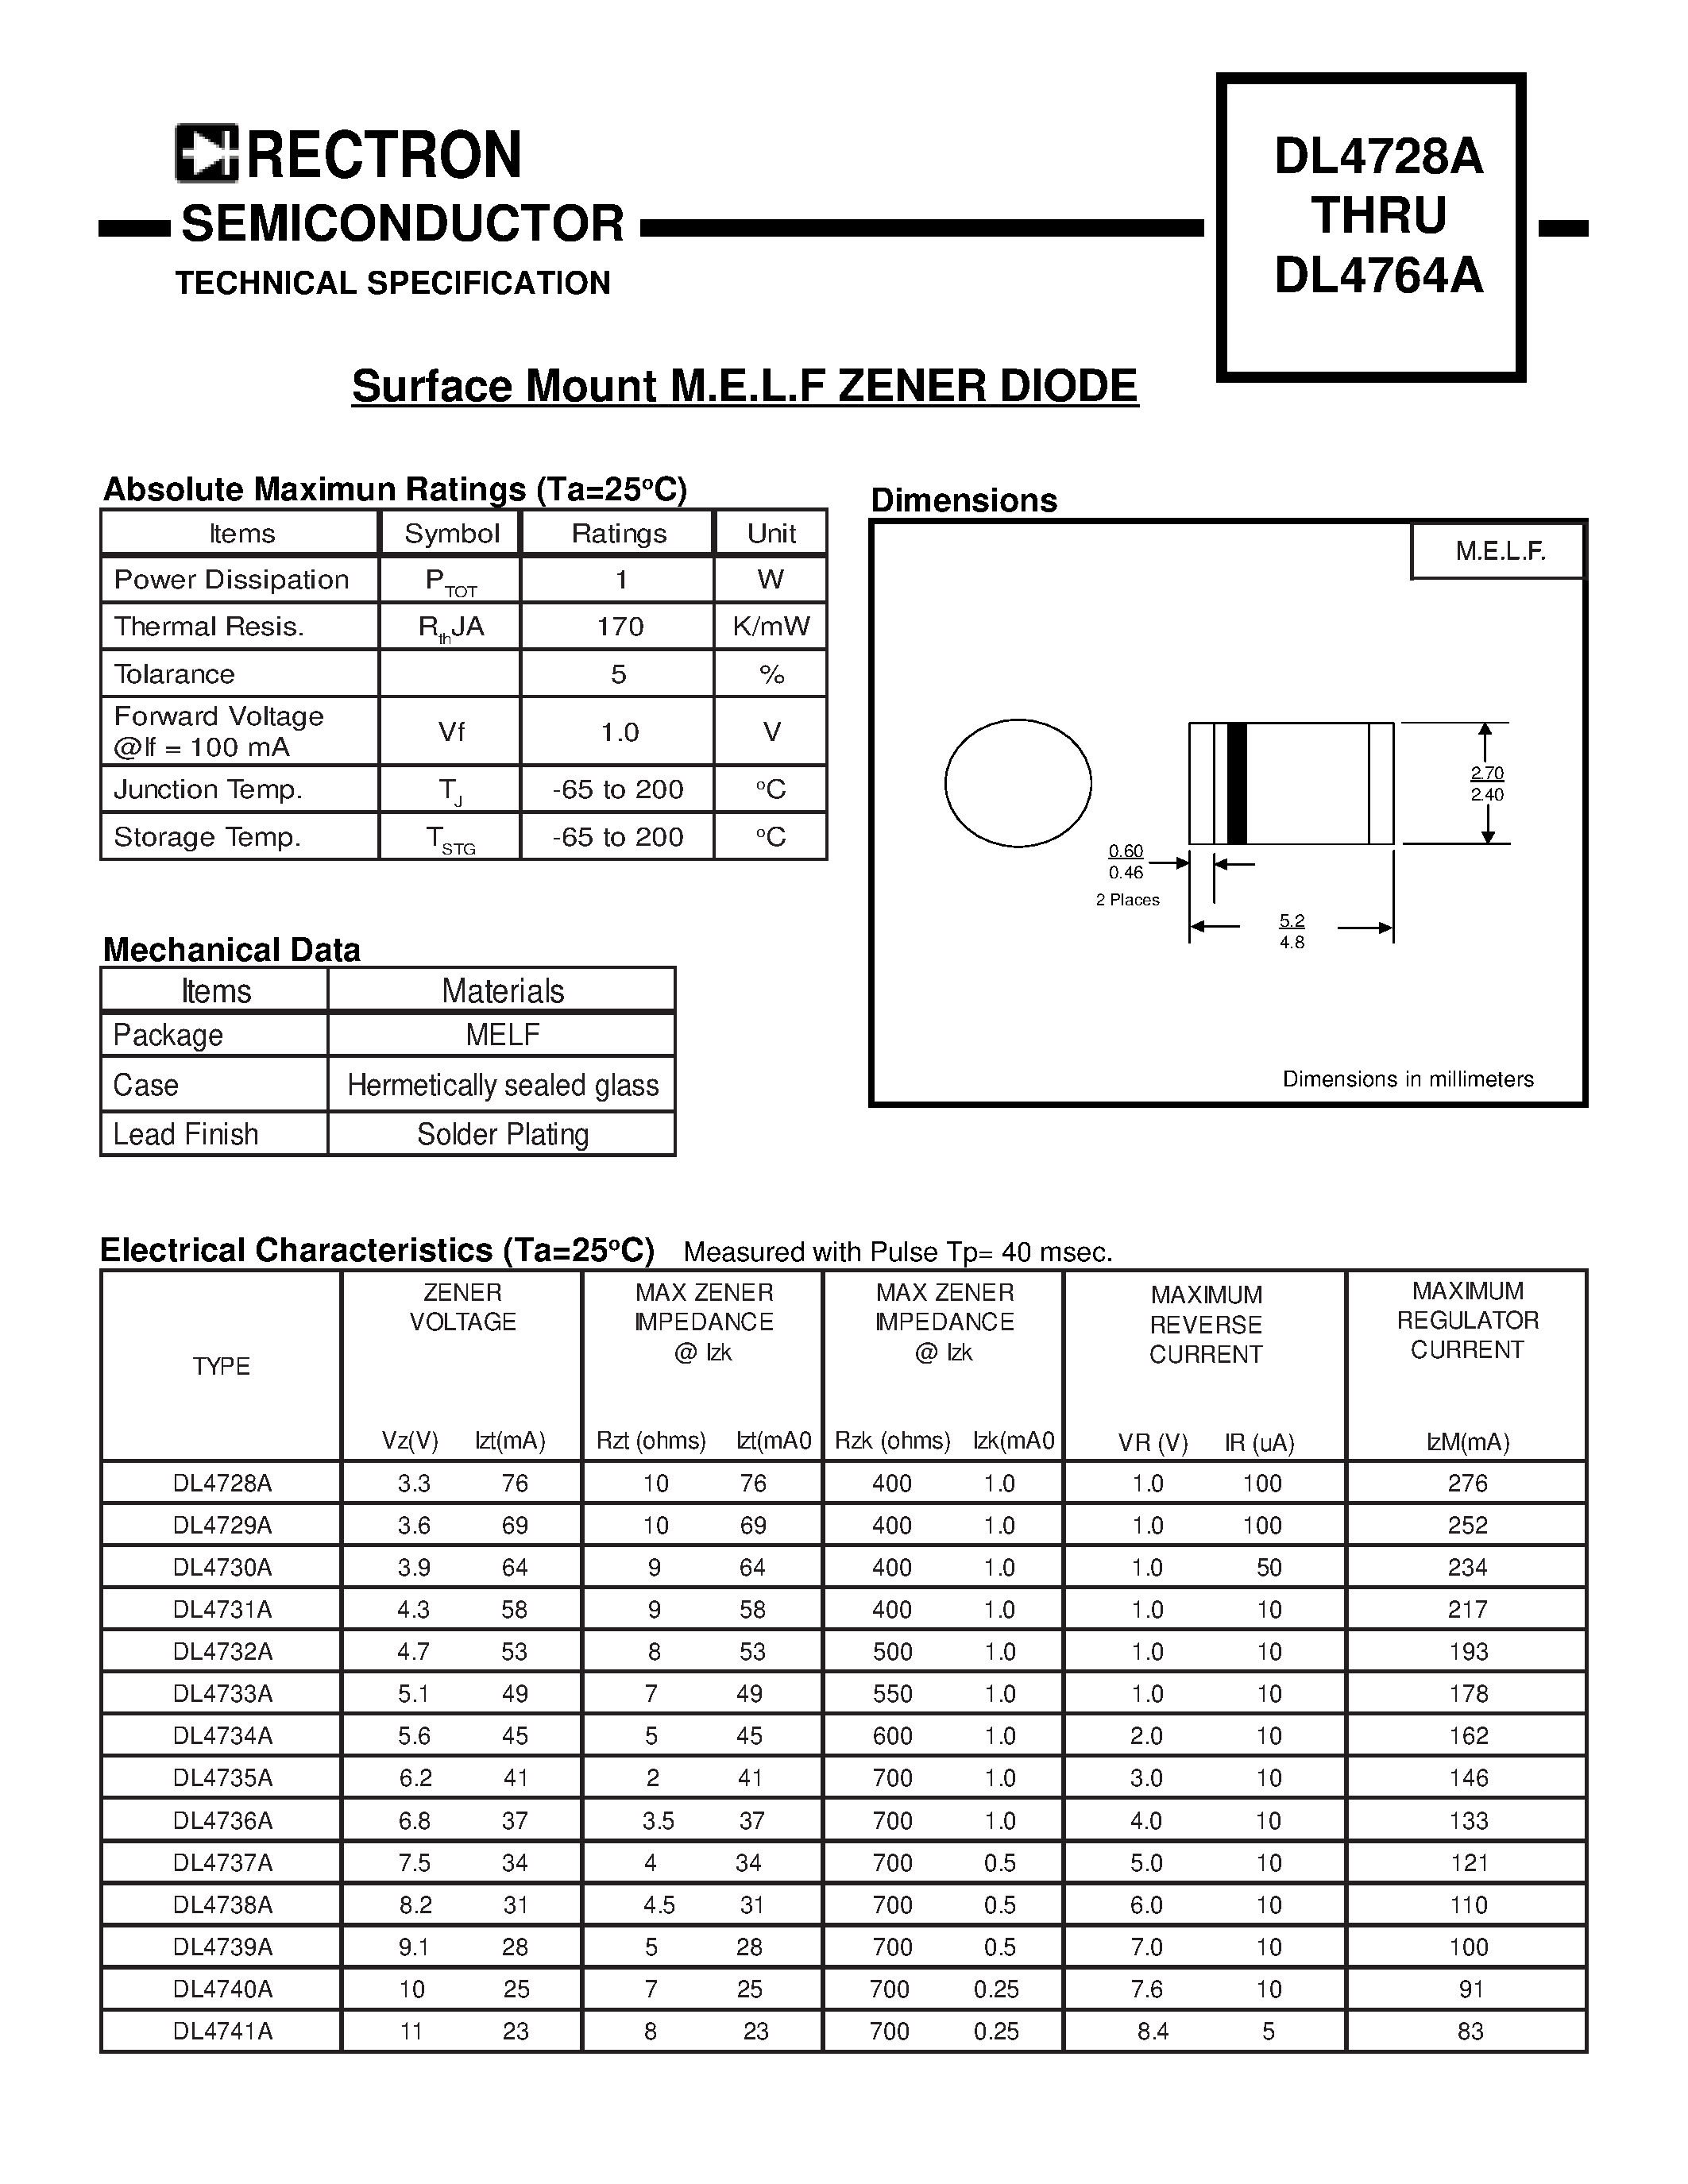 Datasheet DL4763A - Surface Mount M.E.L.F ZENER DIODE page 1